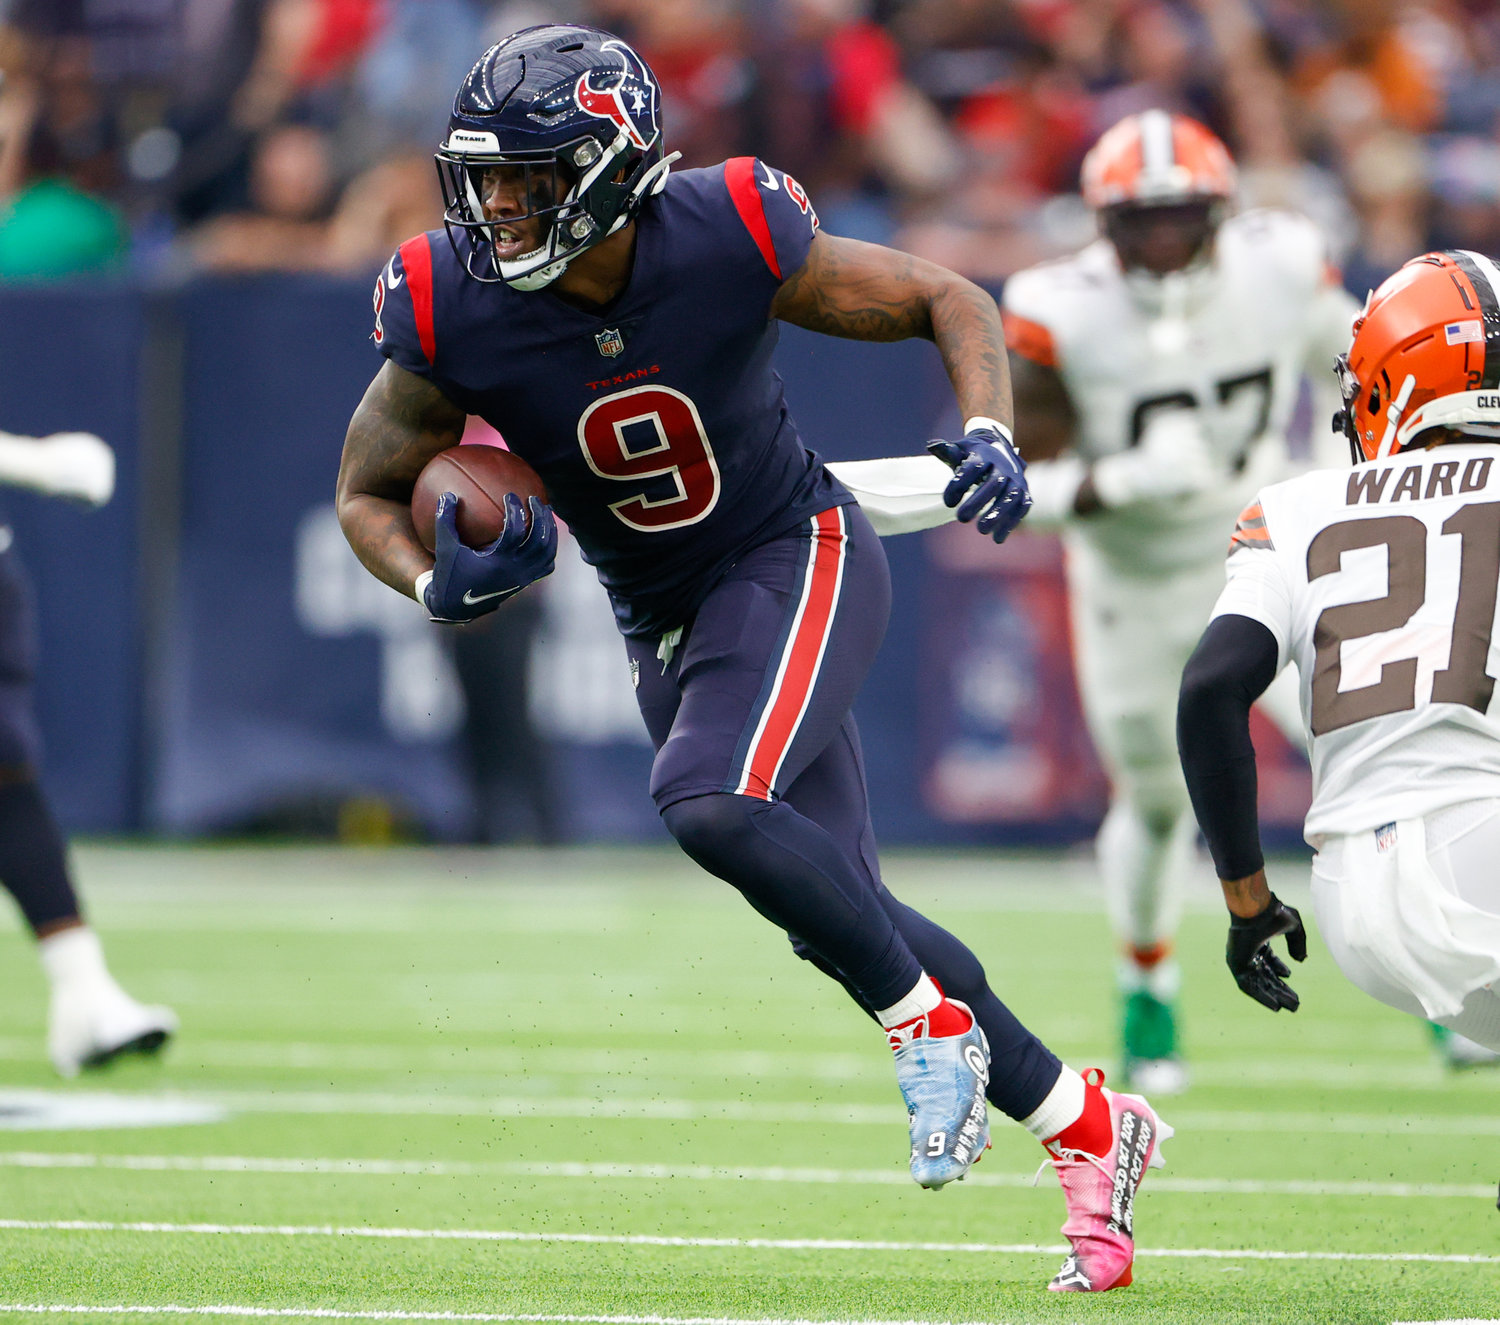 Houston Texans tight end Brevin Jordan (9) carries the ball after a catch during an NFL game between the Houston Texans and the Cleveland Browns on Dec. 4, 2022, in Houston. The Browns won, 27-14.